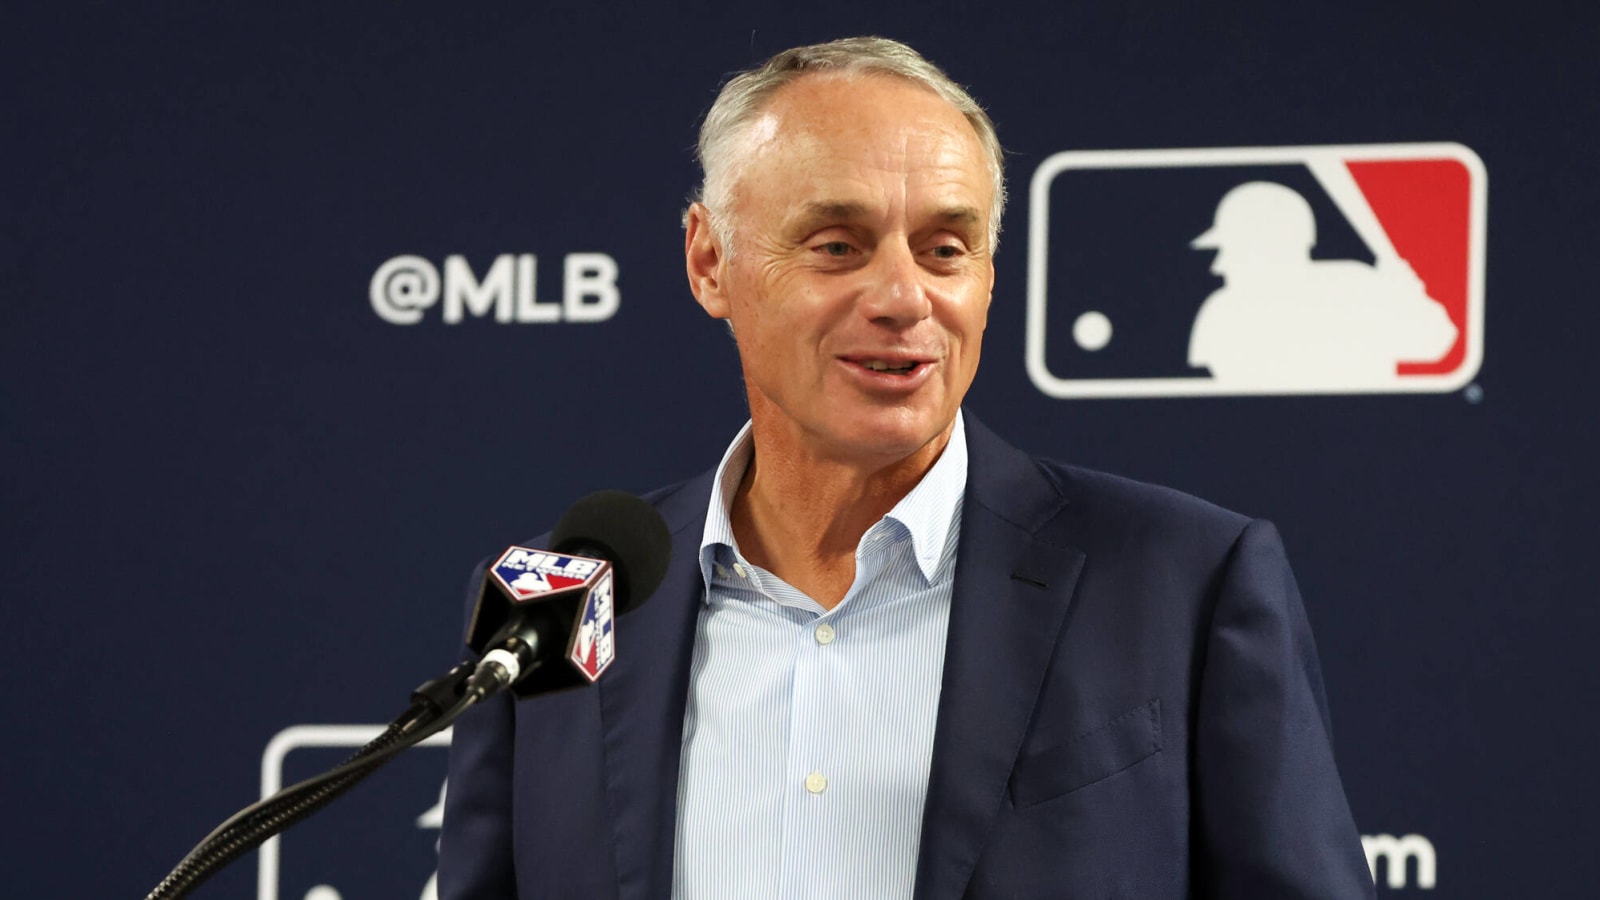 Rob Manfred’s 2029 Replacement Needs to Be About Baseball